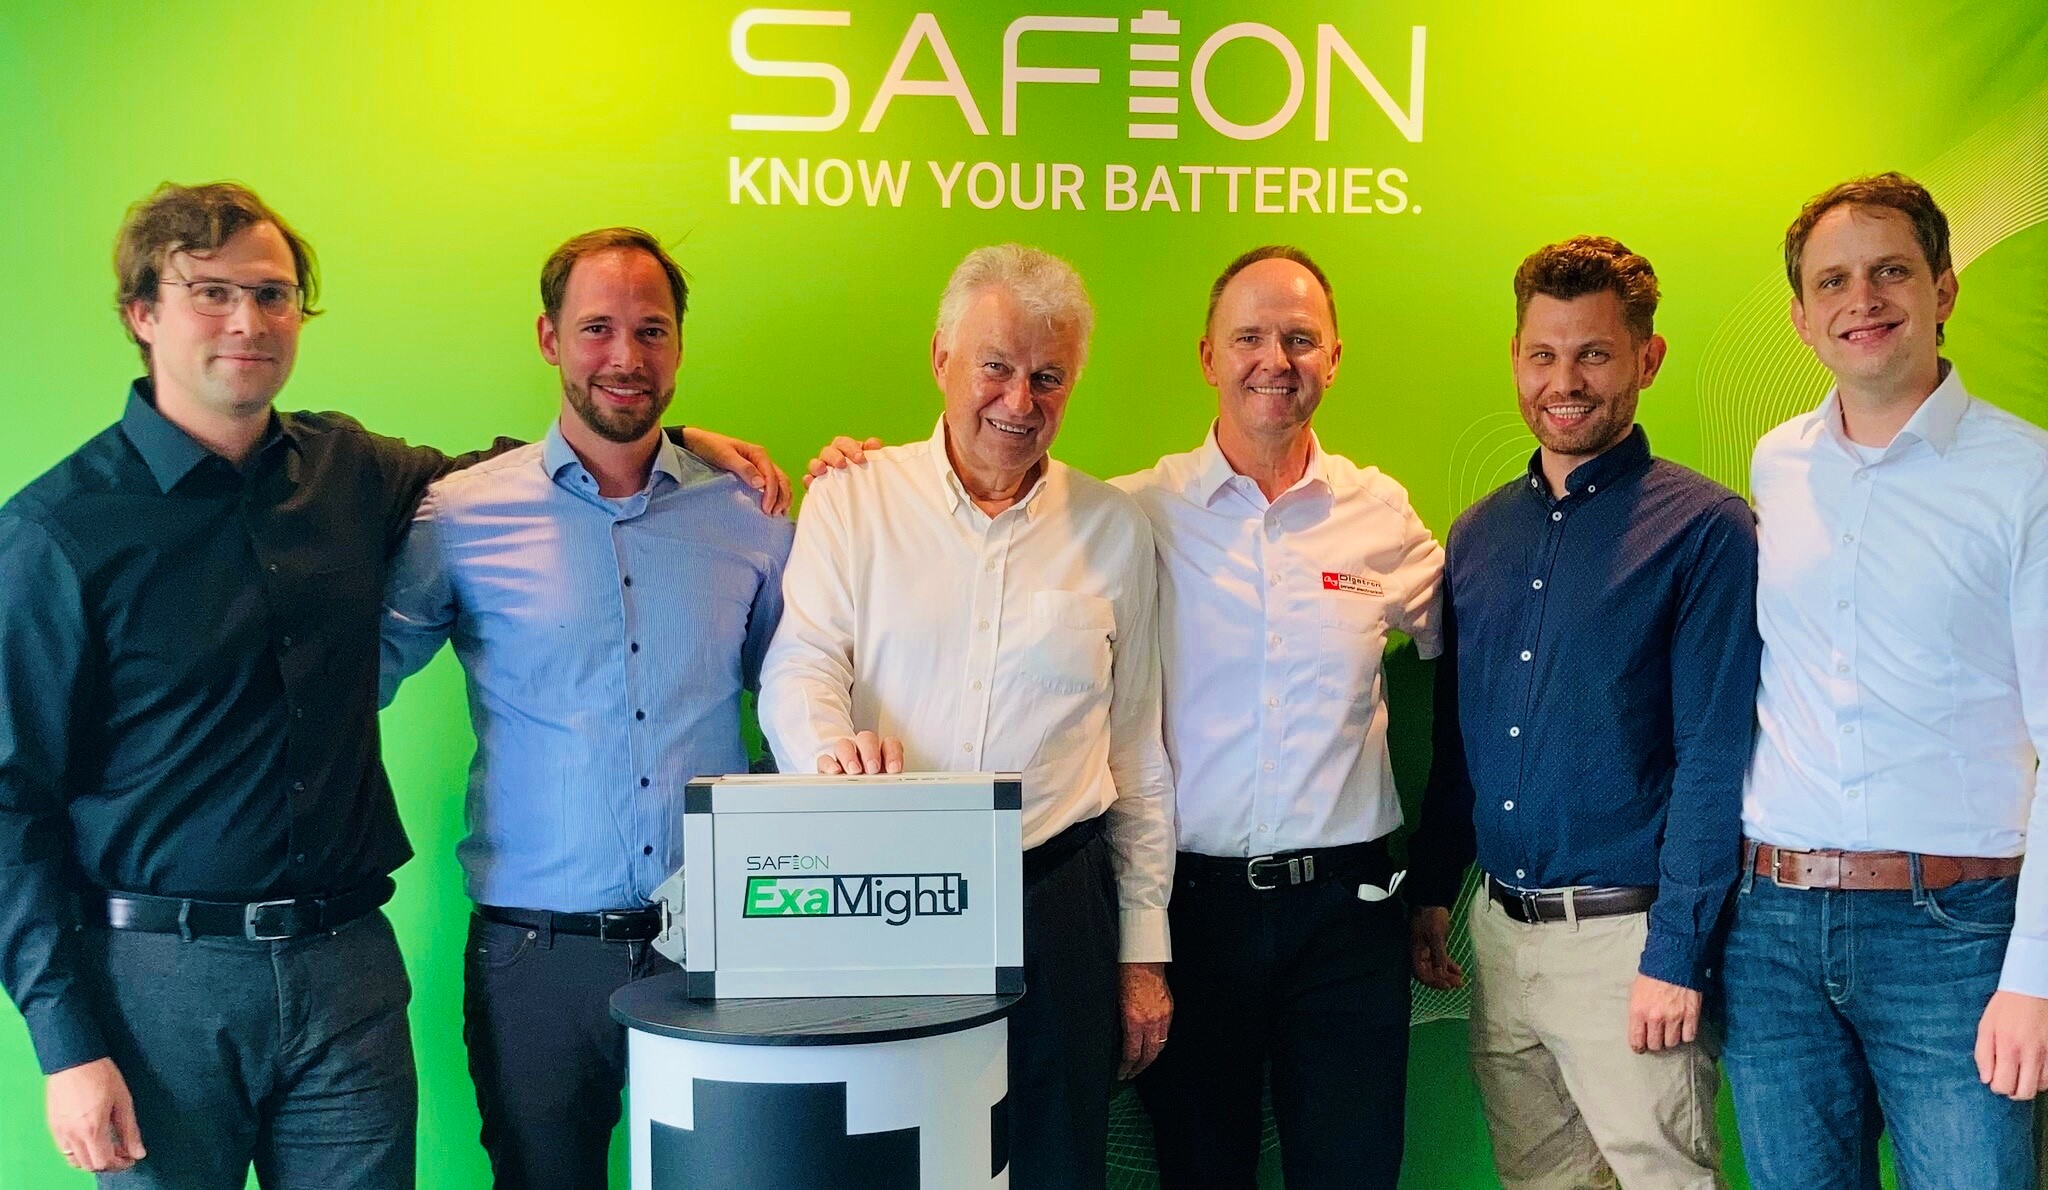 Team Digatron & Safion pictured together : From left to right : Alexander Gitis (Managing Director - Safion), Dr. Arne Hendrik Wienhausen (Head of Hardware - Safion), Rolf Beckers (Founder- Digatron), Kevin Campbell (Global Head of Strategy & market development- Digatron), Georg Fuchs ( R&D Manager & Product development-Safion), Hendrik Zappen (CTO & Co-founder´- Safion)